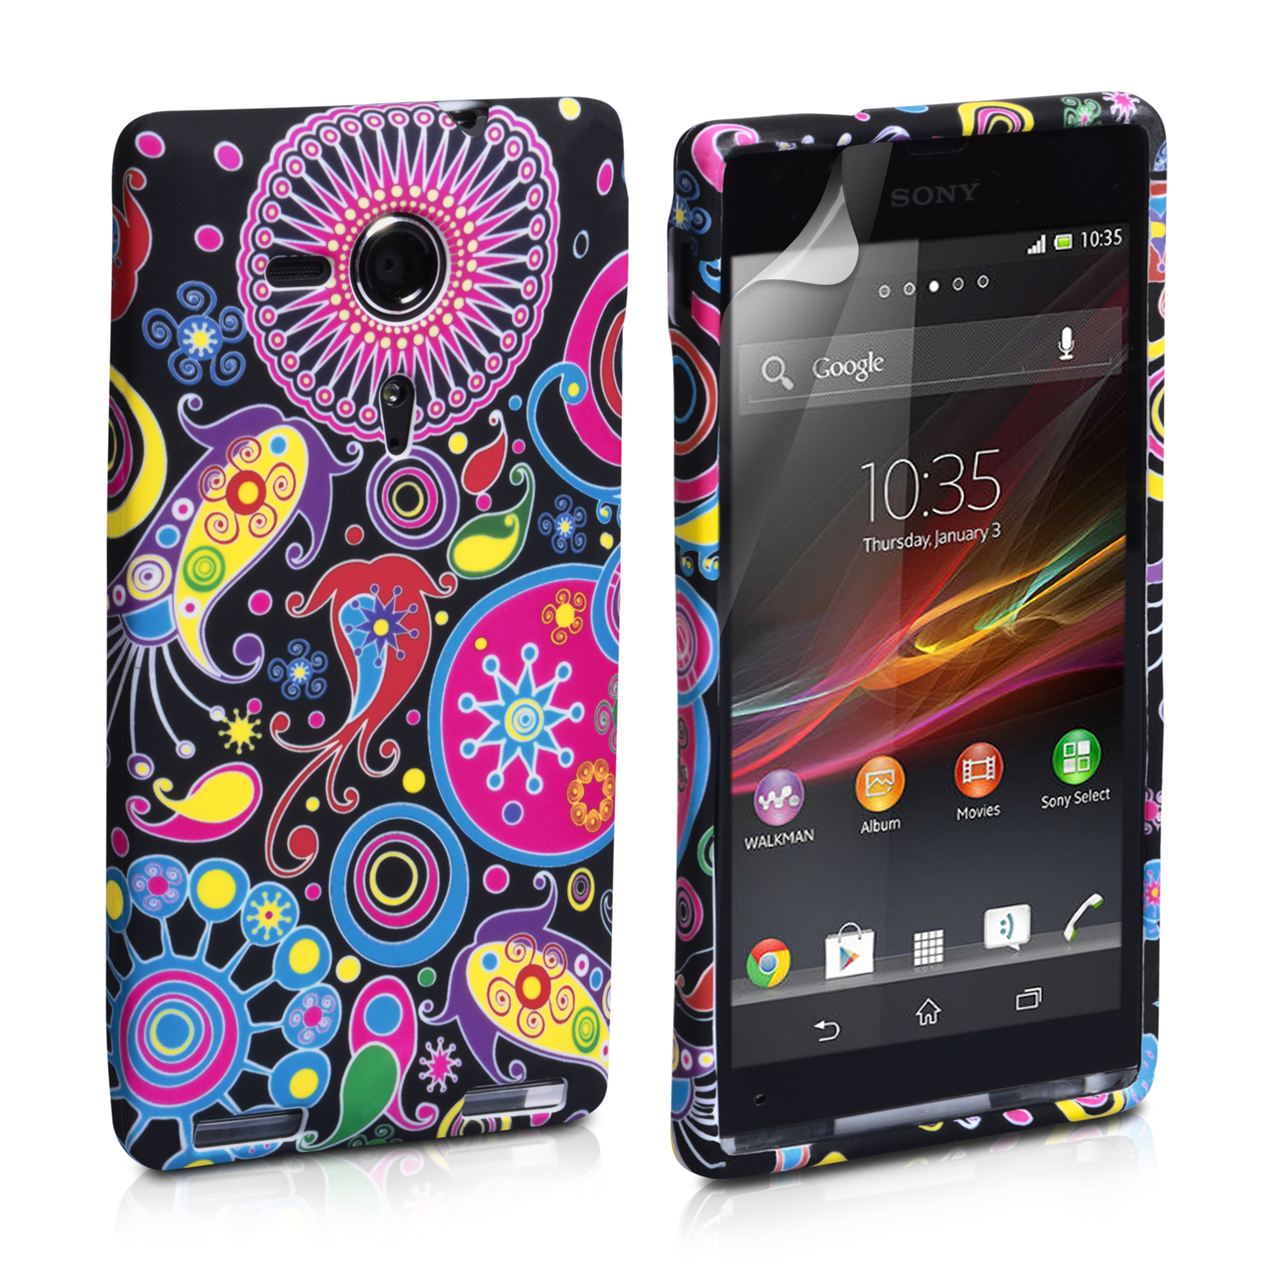 YouSave Accessories Sony Xperia SP Jellyfish Silicone Gel Case